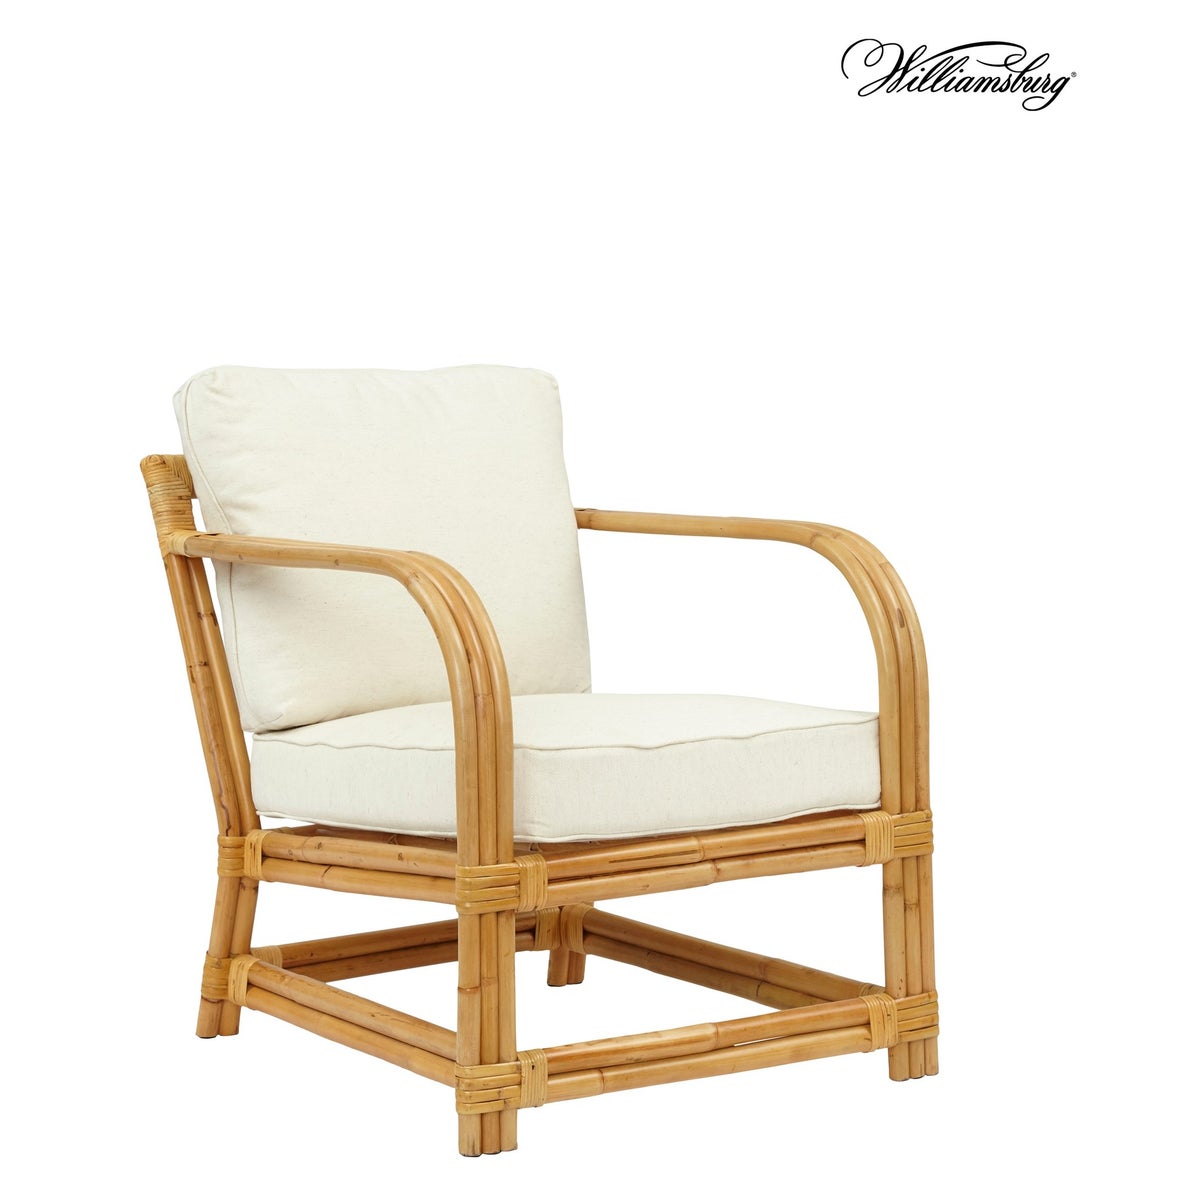 Bassett Hall Club Chair Frame Color - Natural Cushion Color -  Holly White